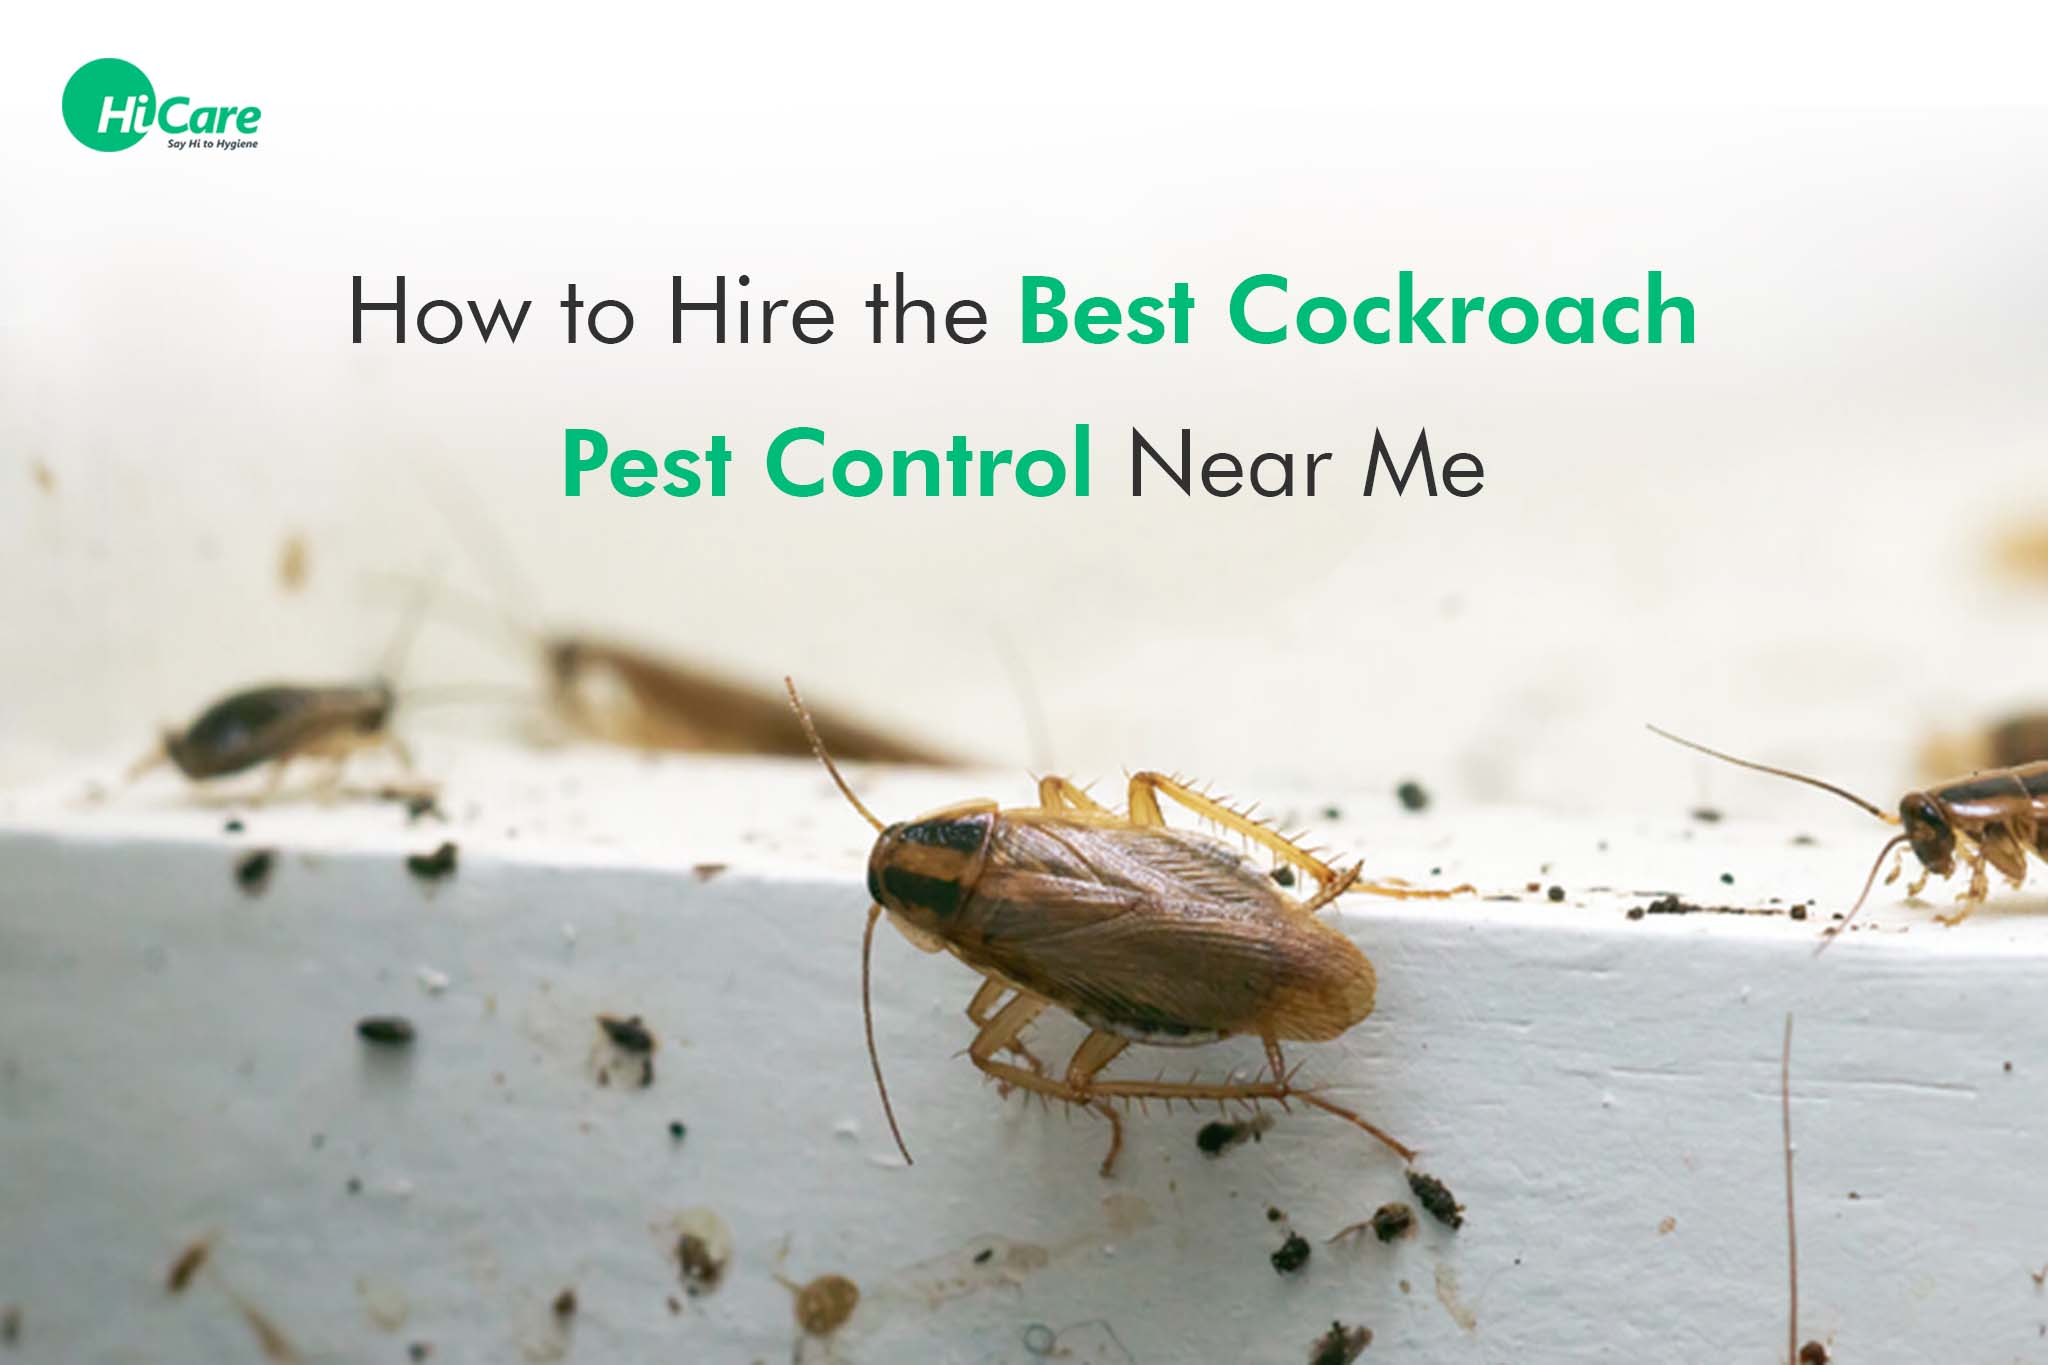 How to Hire the Best Cockroach Pest Control Near Me